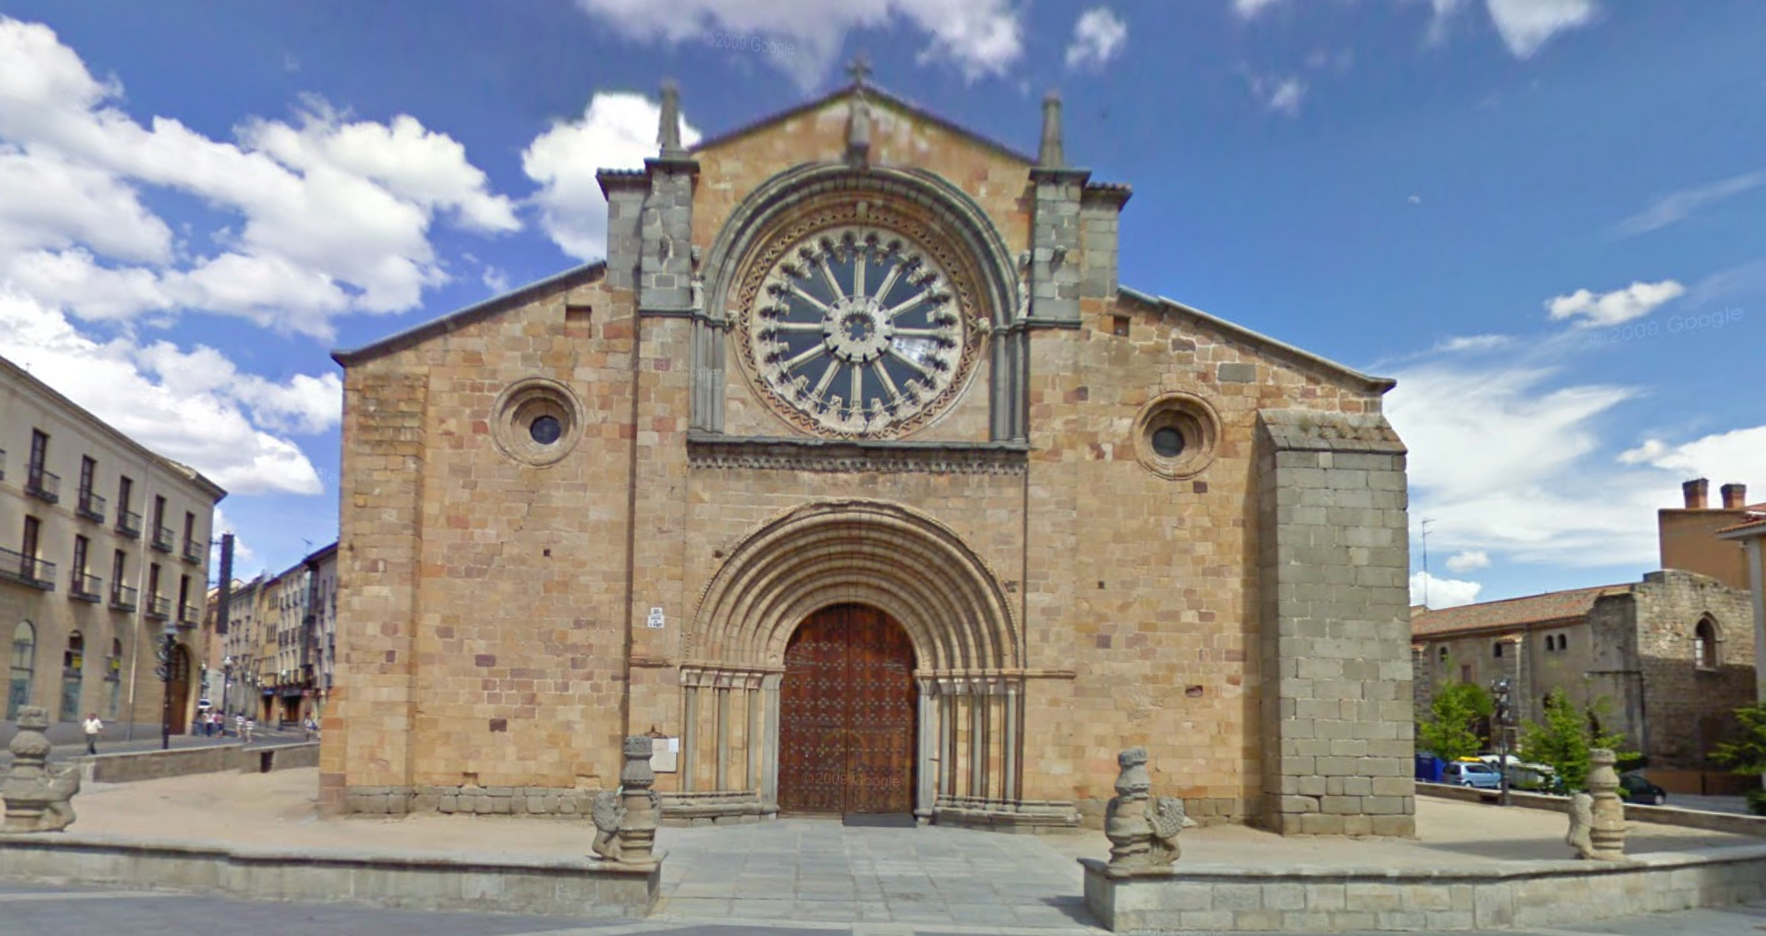 Parish of St. Peter the Apostle by Google Earth